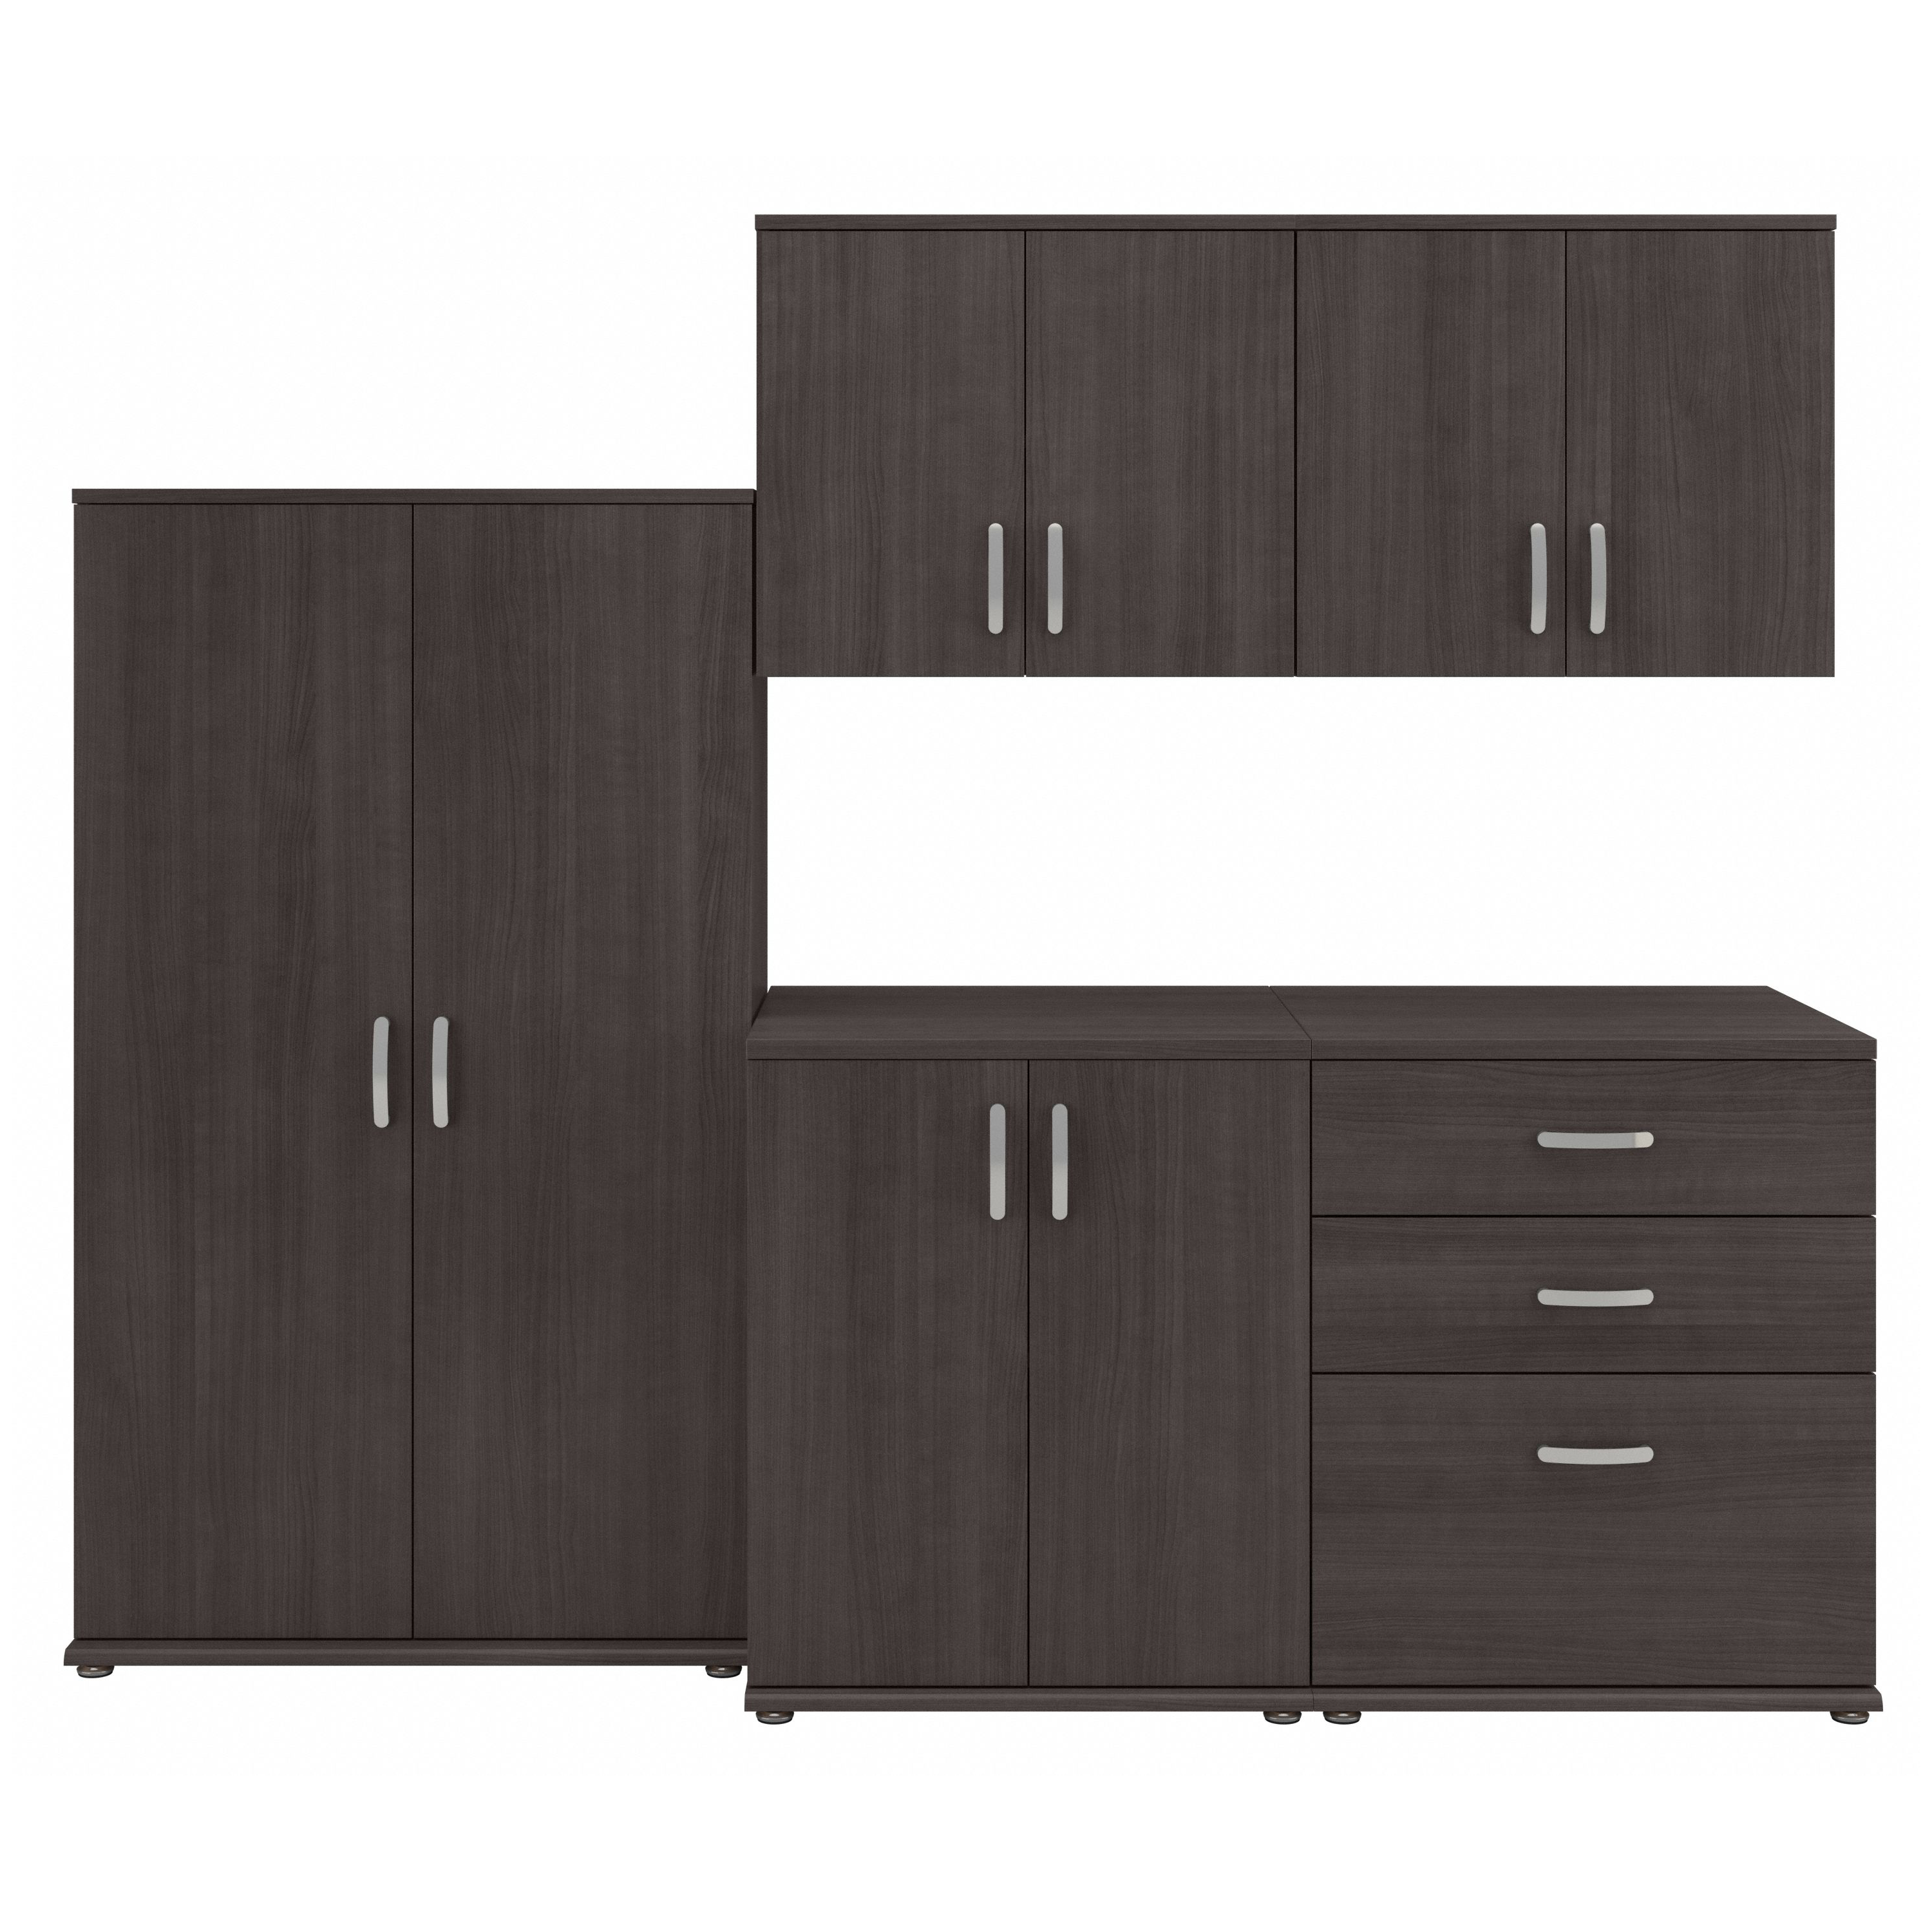 Shop Bush Business Furniture Universal 5 Piece Modular Closet Storage Set with Floor and Wall Cabinets 02 CLS003SG #color_storm gray